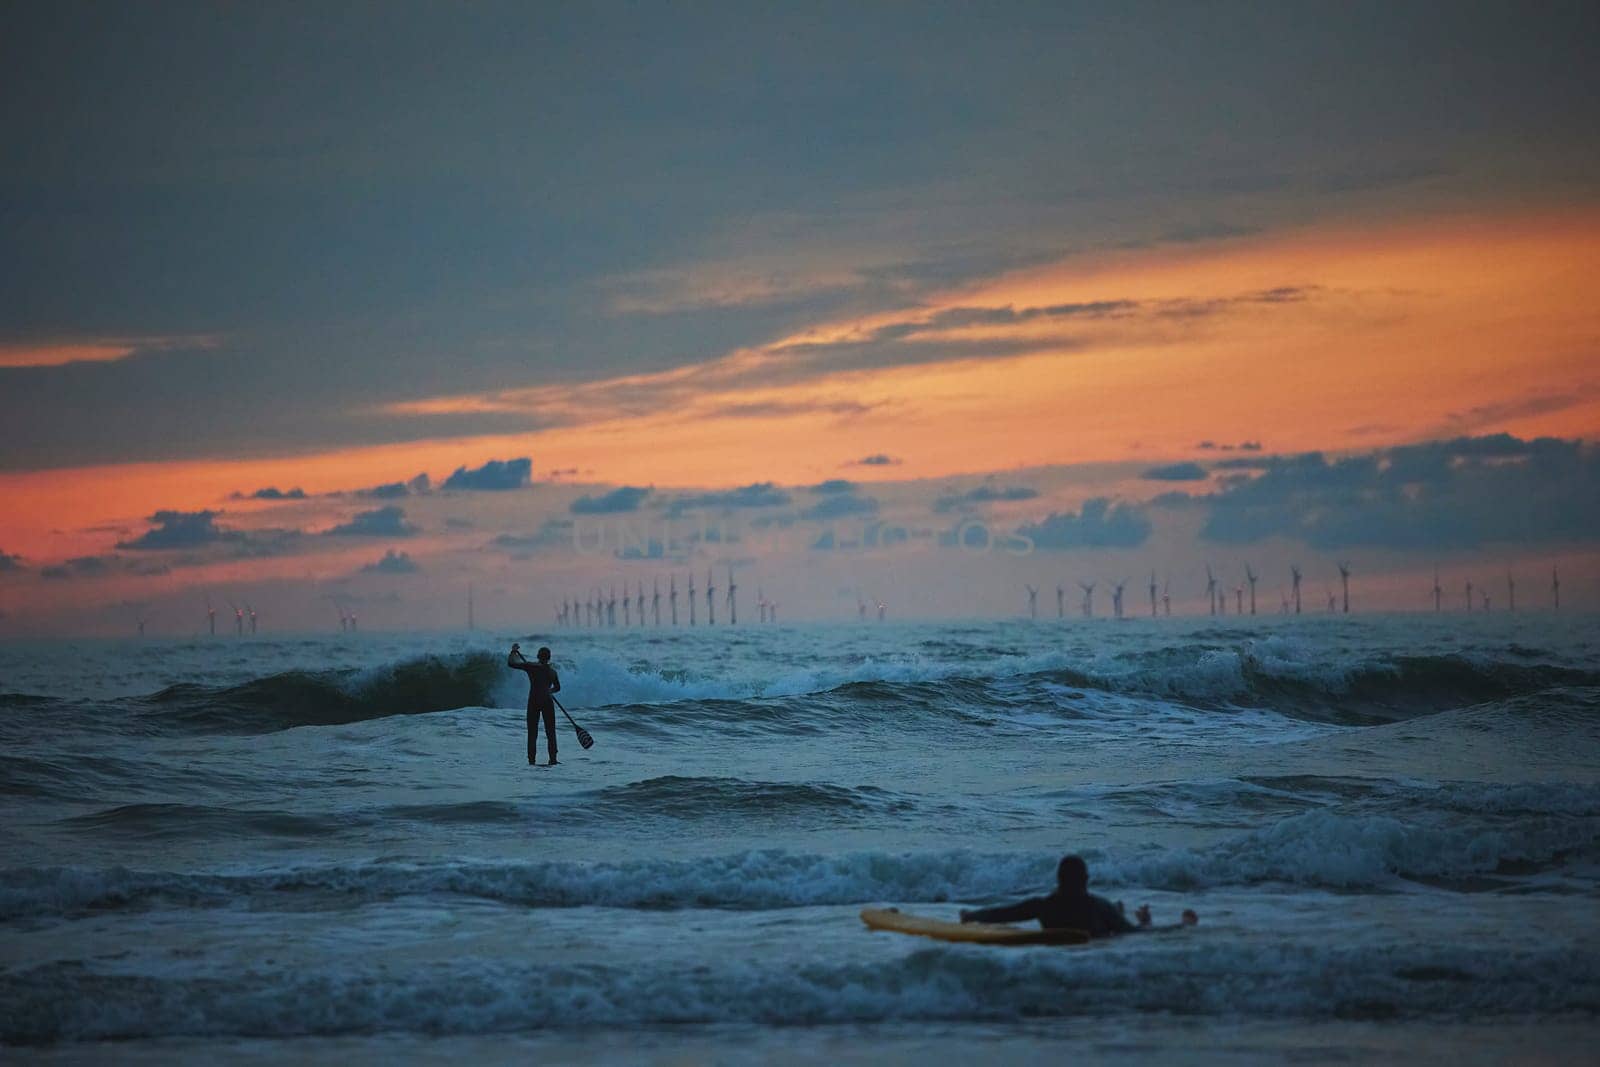 Surfer in the North Sea in the Netherlands at night.